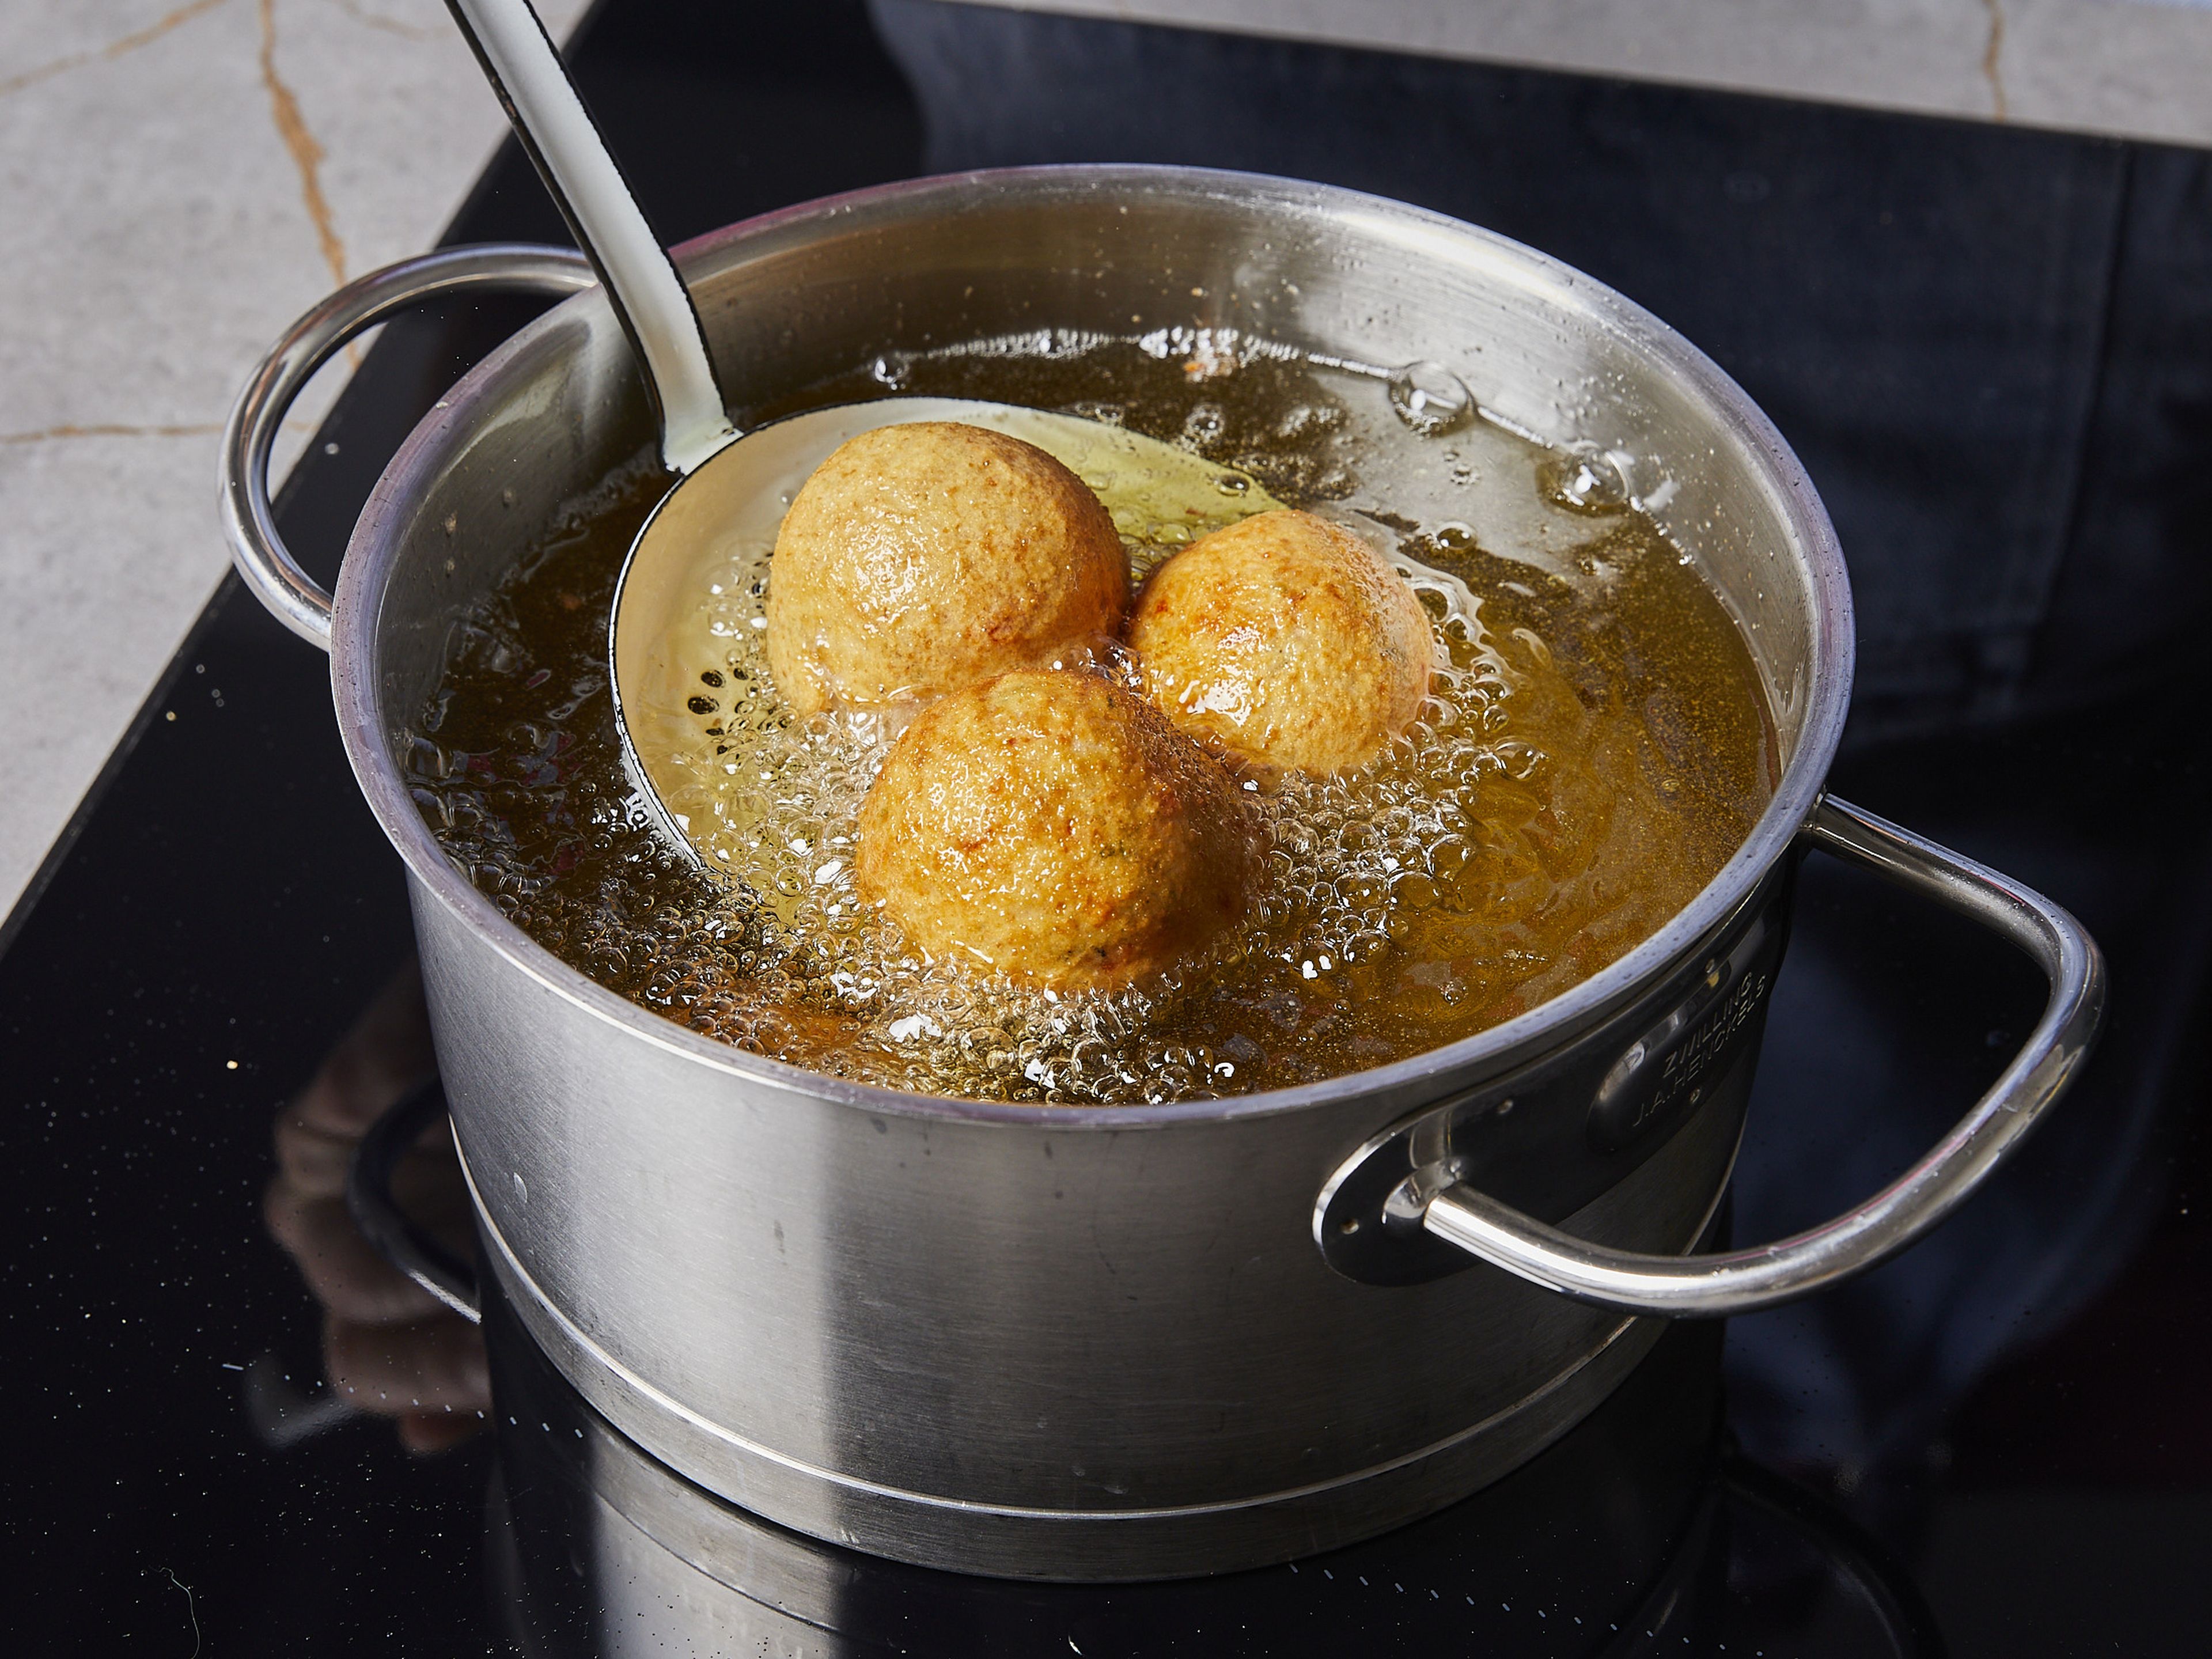 Heat vegetable oil in a small pot until it’s approx 180°C/350°F. Add arancini in batches and deep-fry until crispy and golden brown, approx. 6—7 min. Transfer to a paper towel to drain. Serve warm with Marinara sauce for dipping.